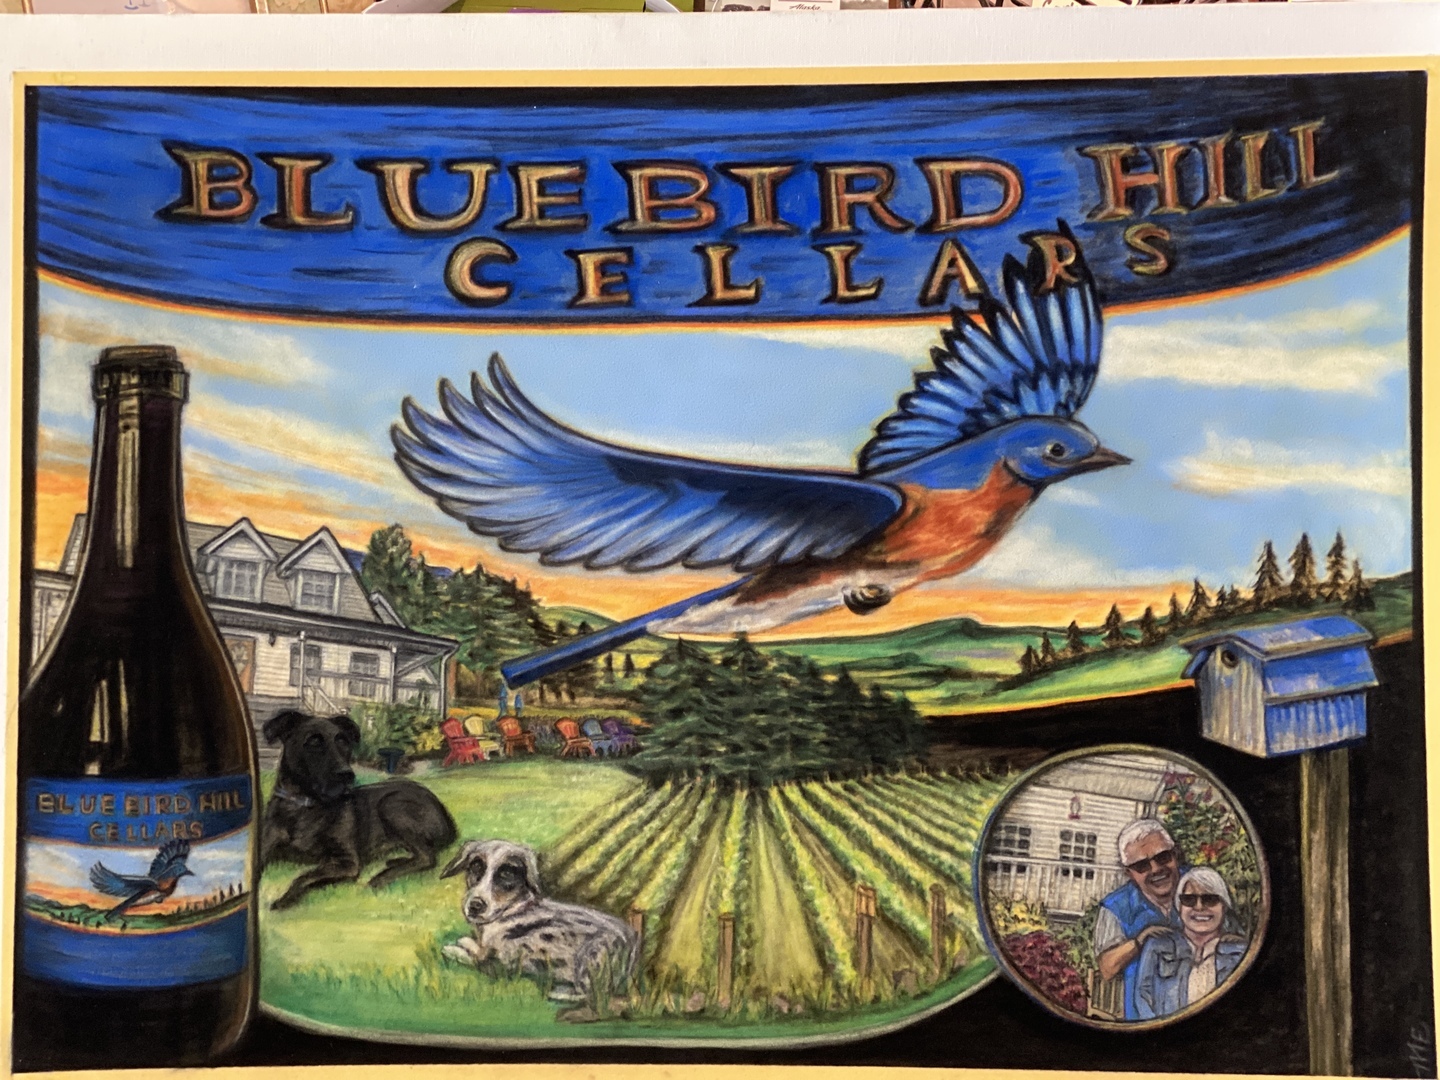 "Thanksgiving in August" at Bluebird Hill Cellars, Monroe, Oregon, United States